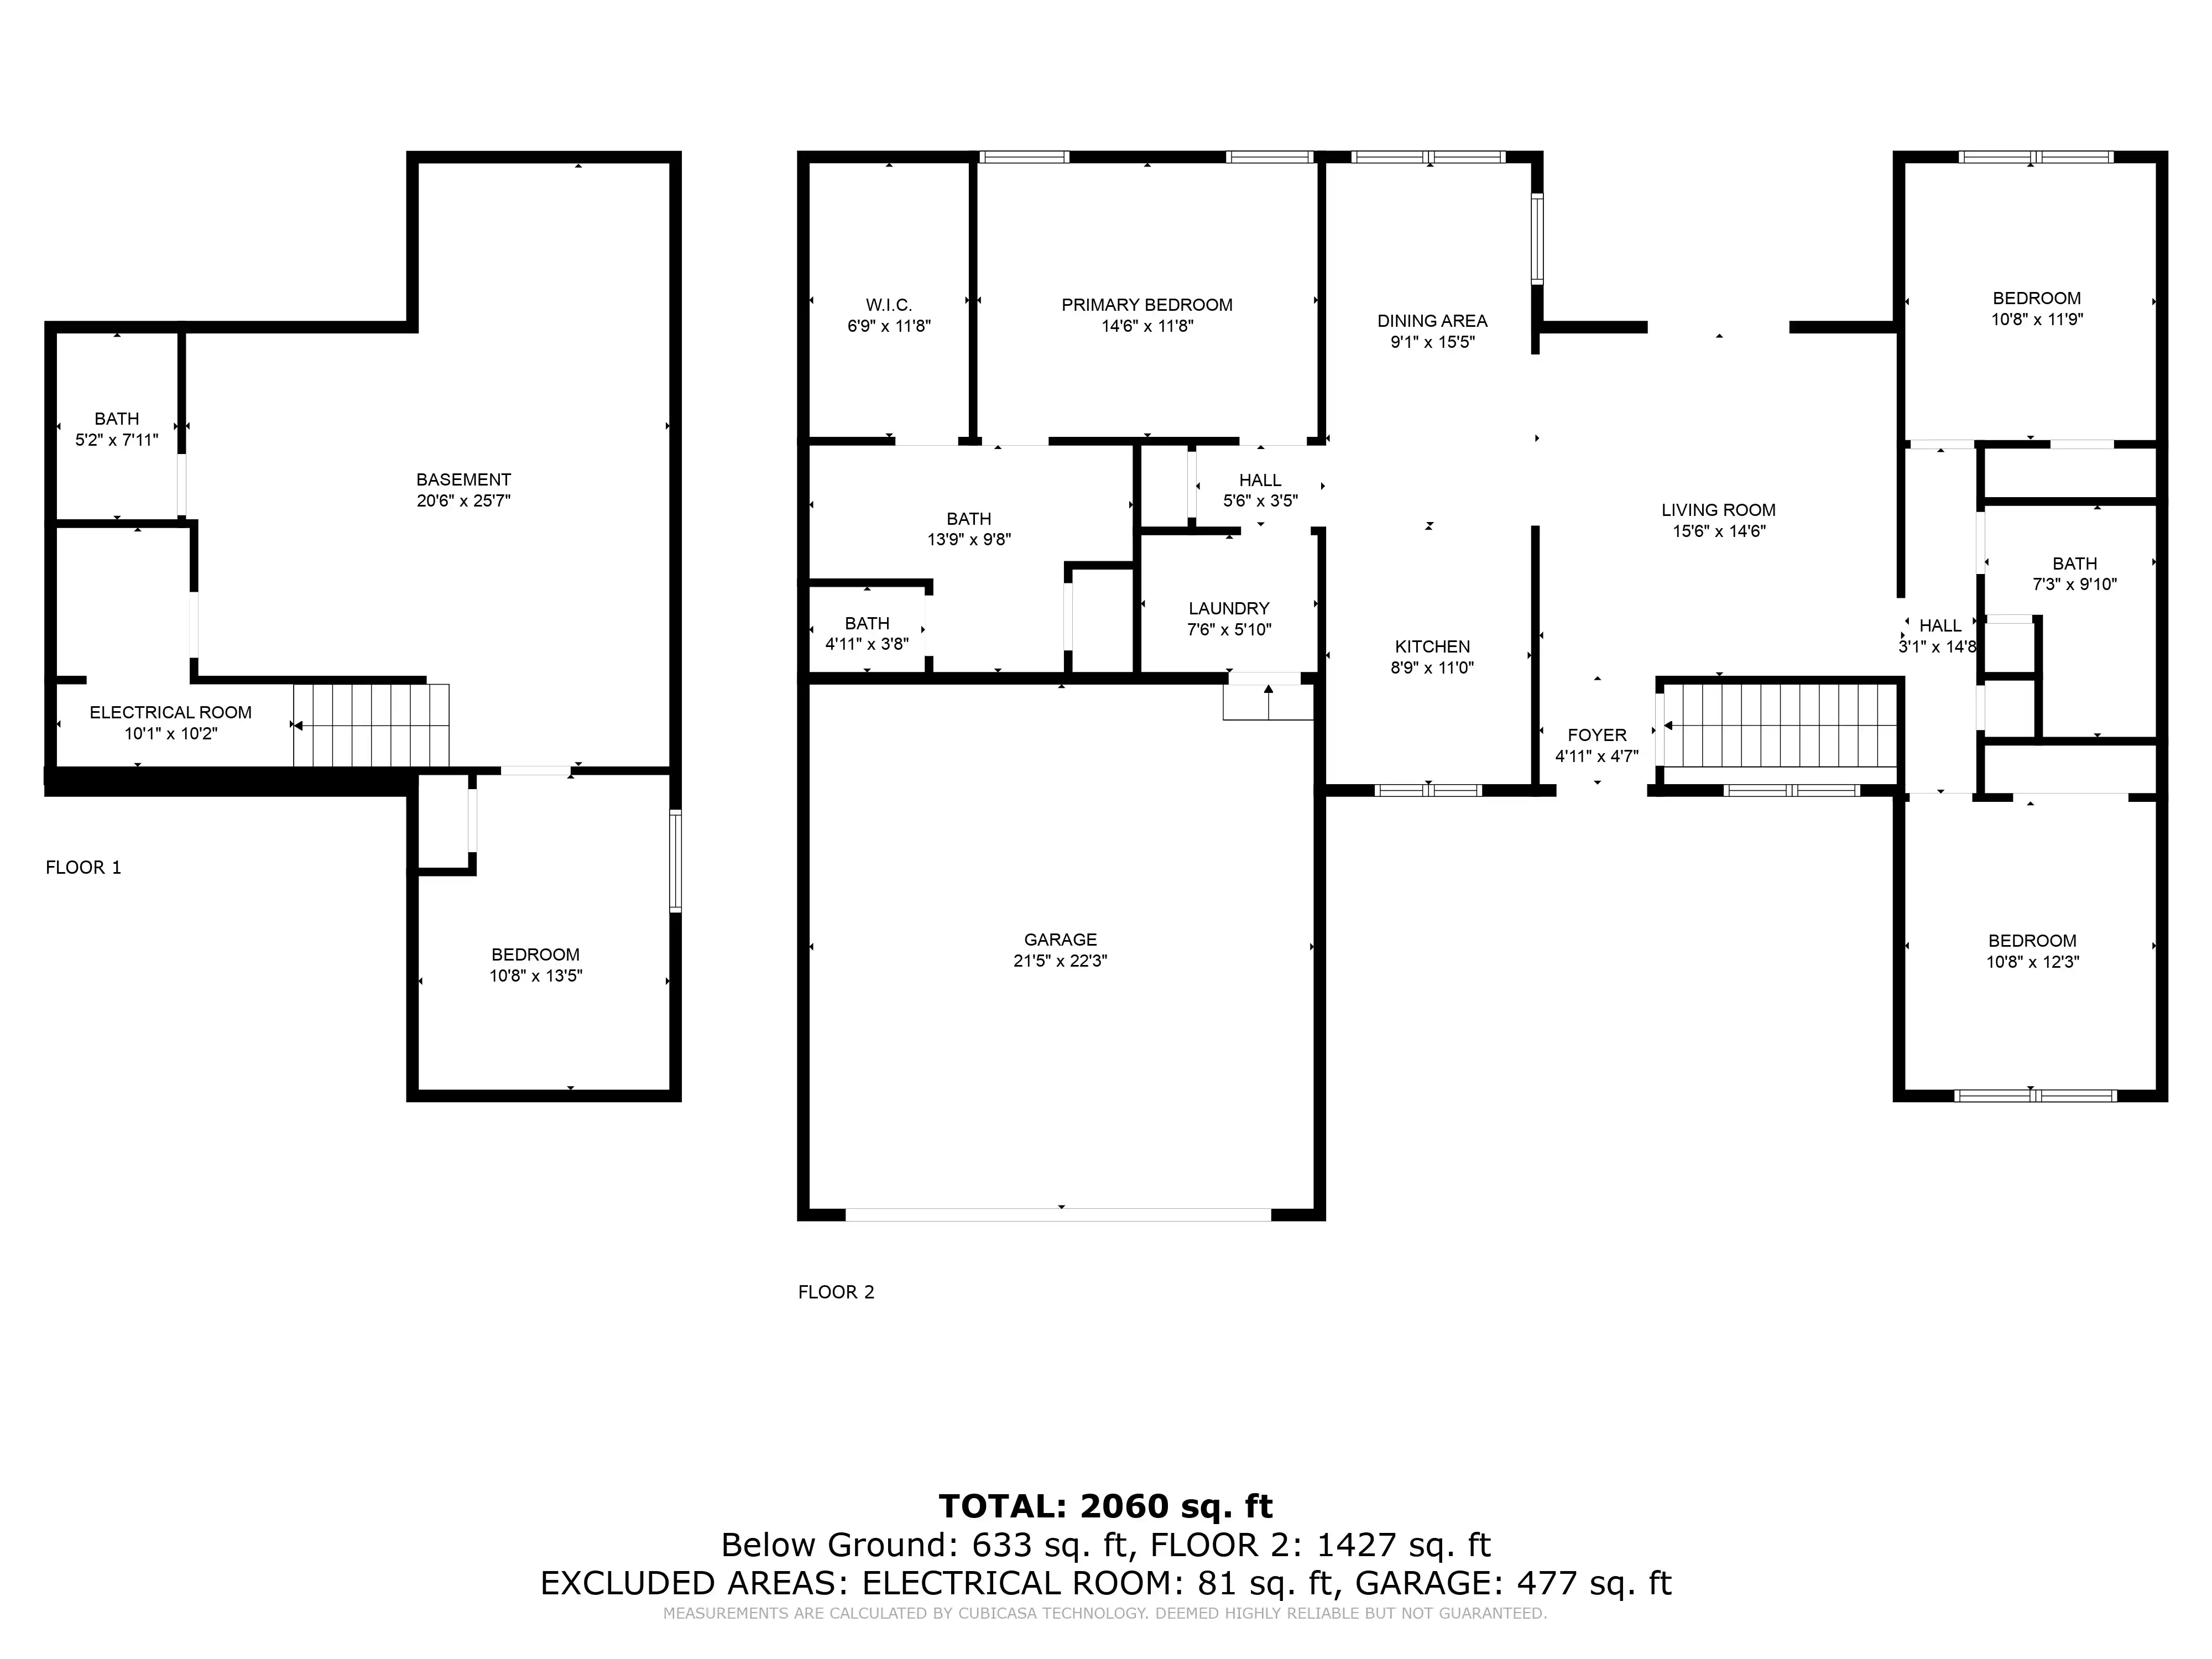 Architectural floor plan of a two-story house totaling 2,060 square feet, indicating room dimensions and layout, including bedrooms, bathrooms, kitchen, living areas, garage, and basement.